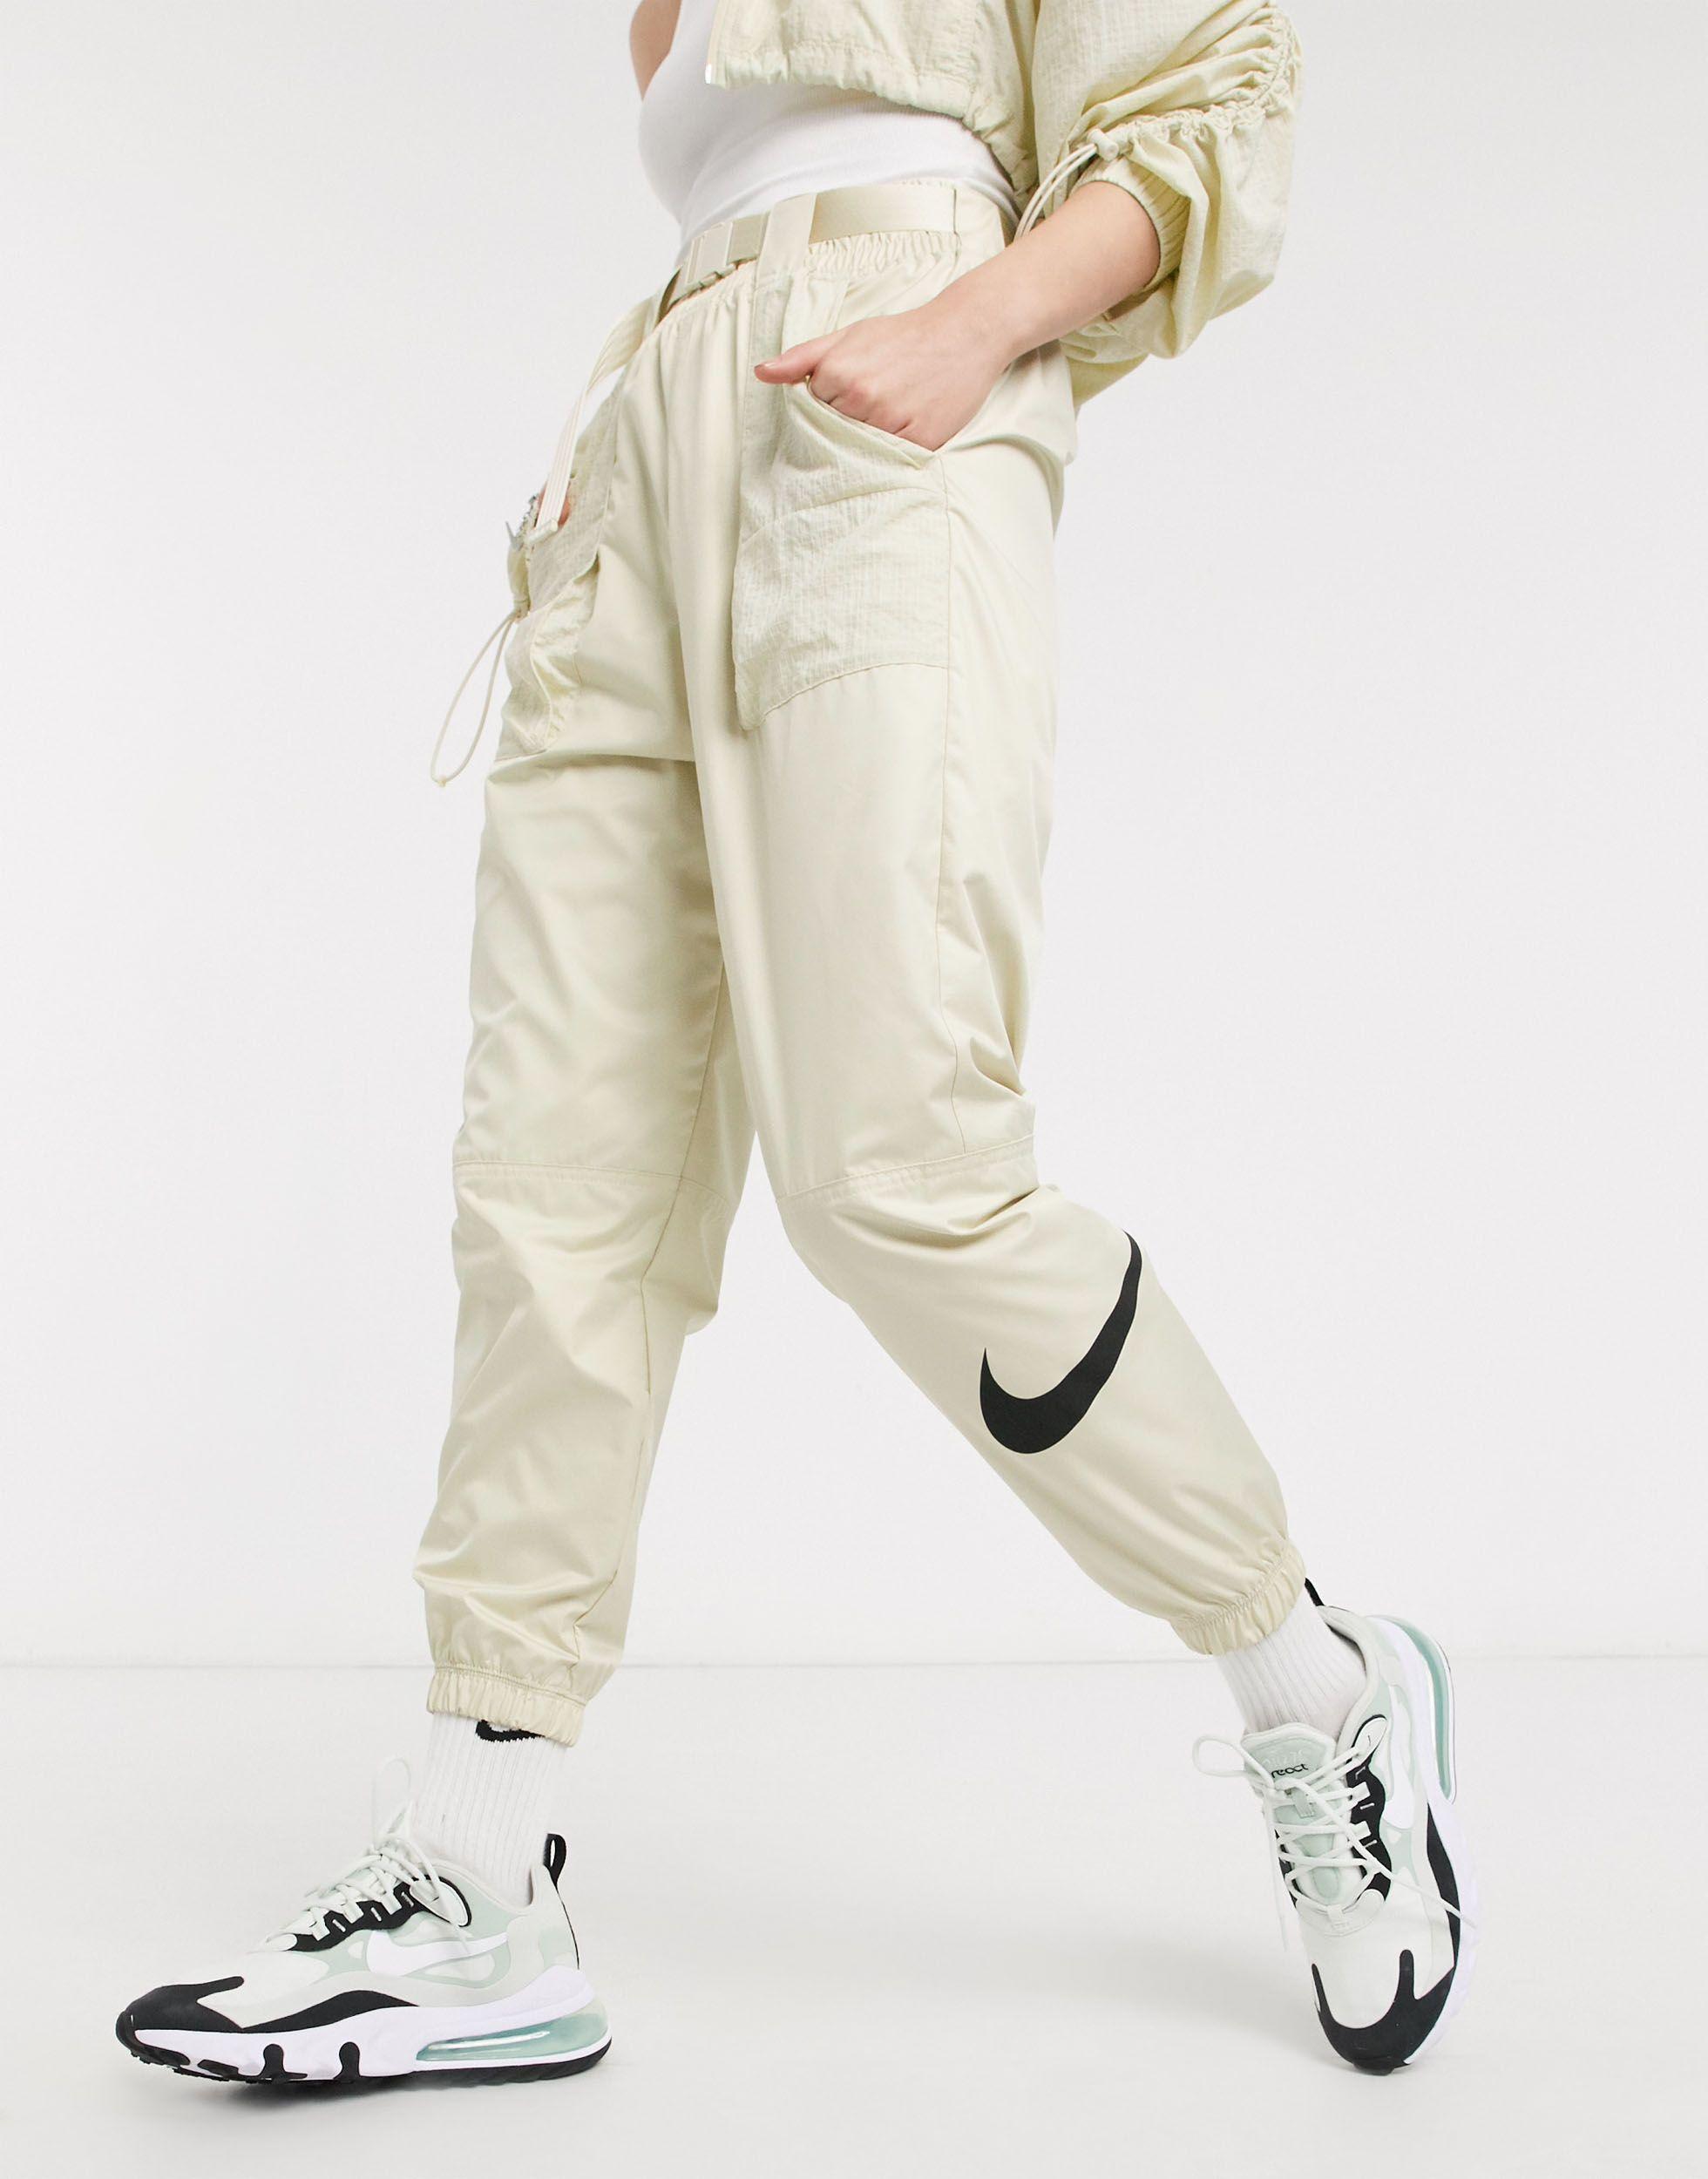 Nike Woven Swoosh Cargo Pants With Belt in White - Lyst